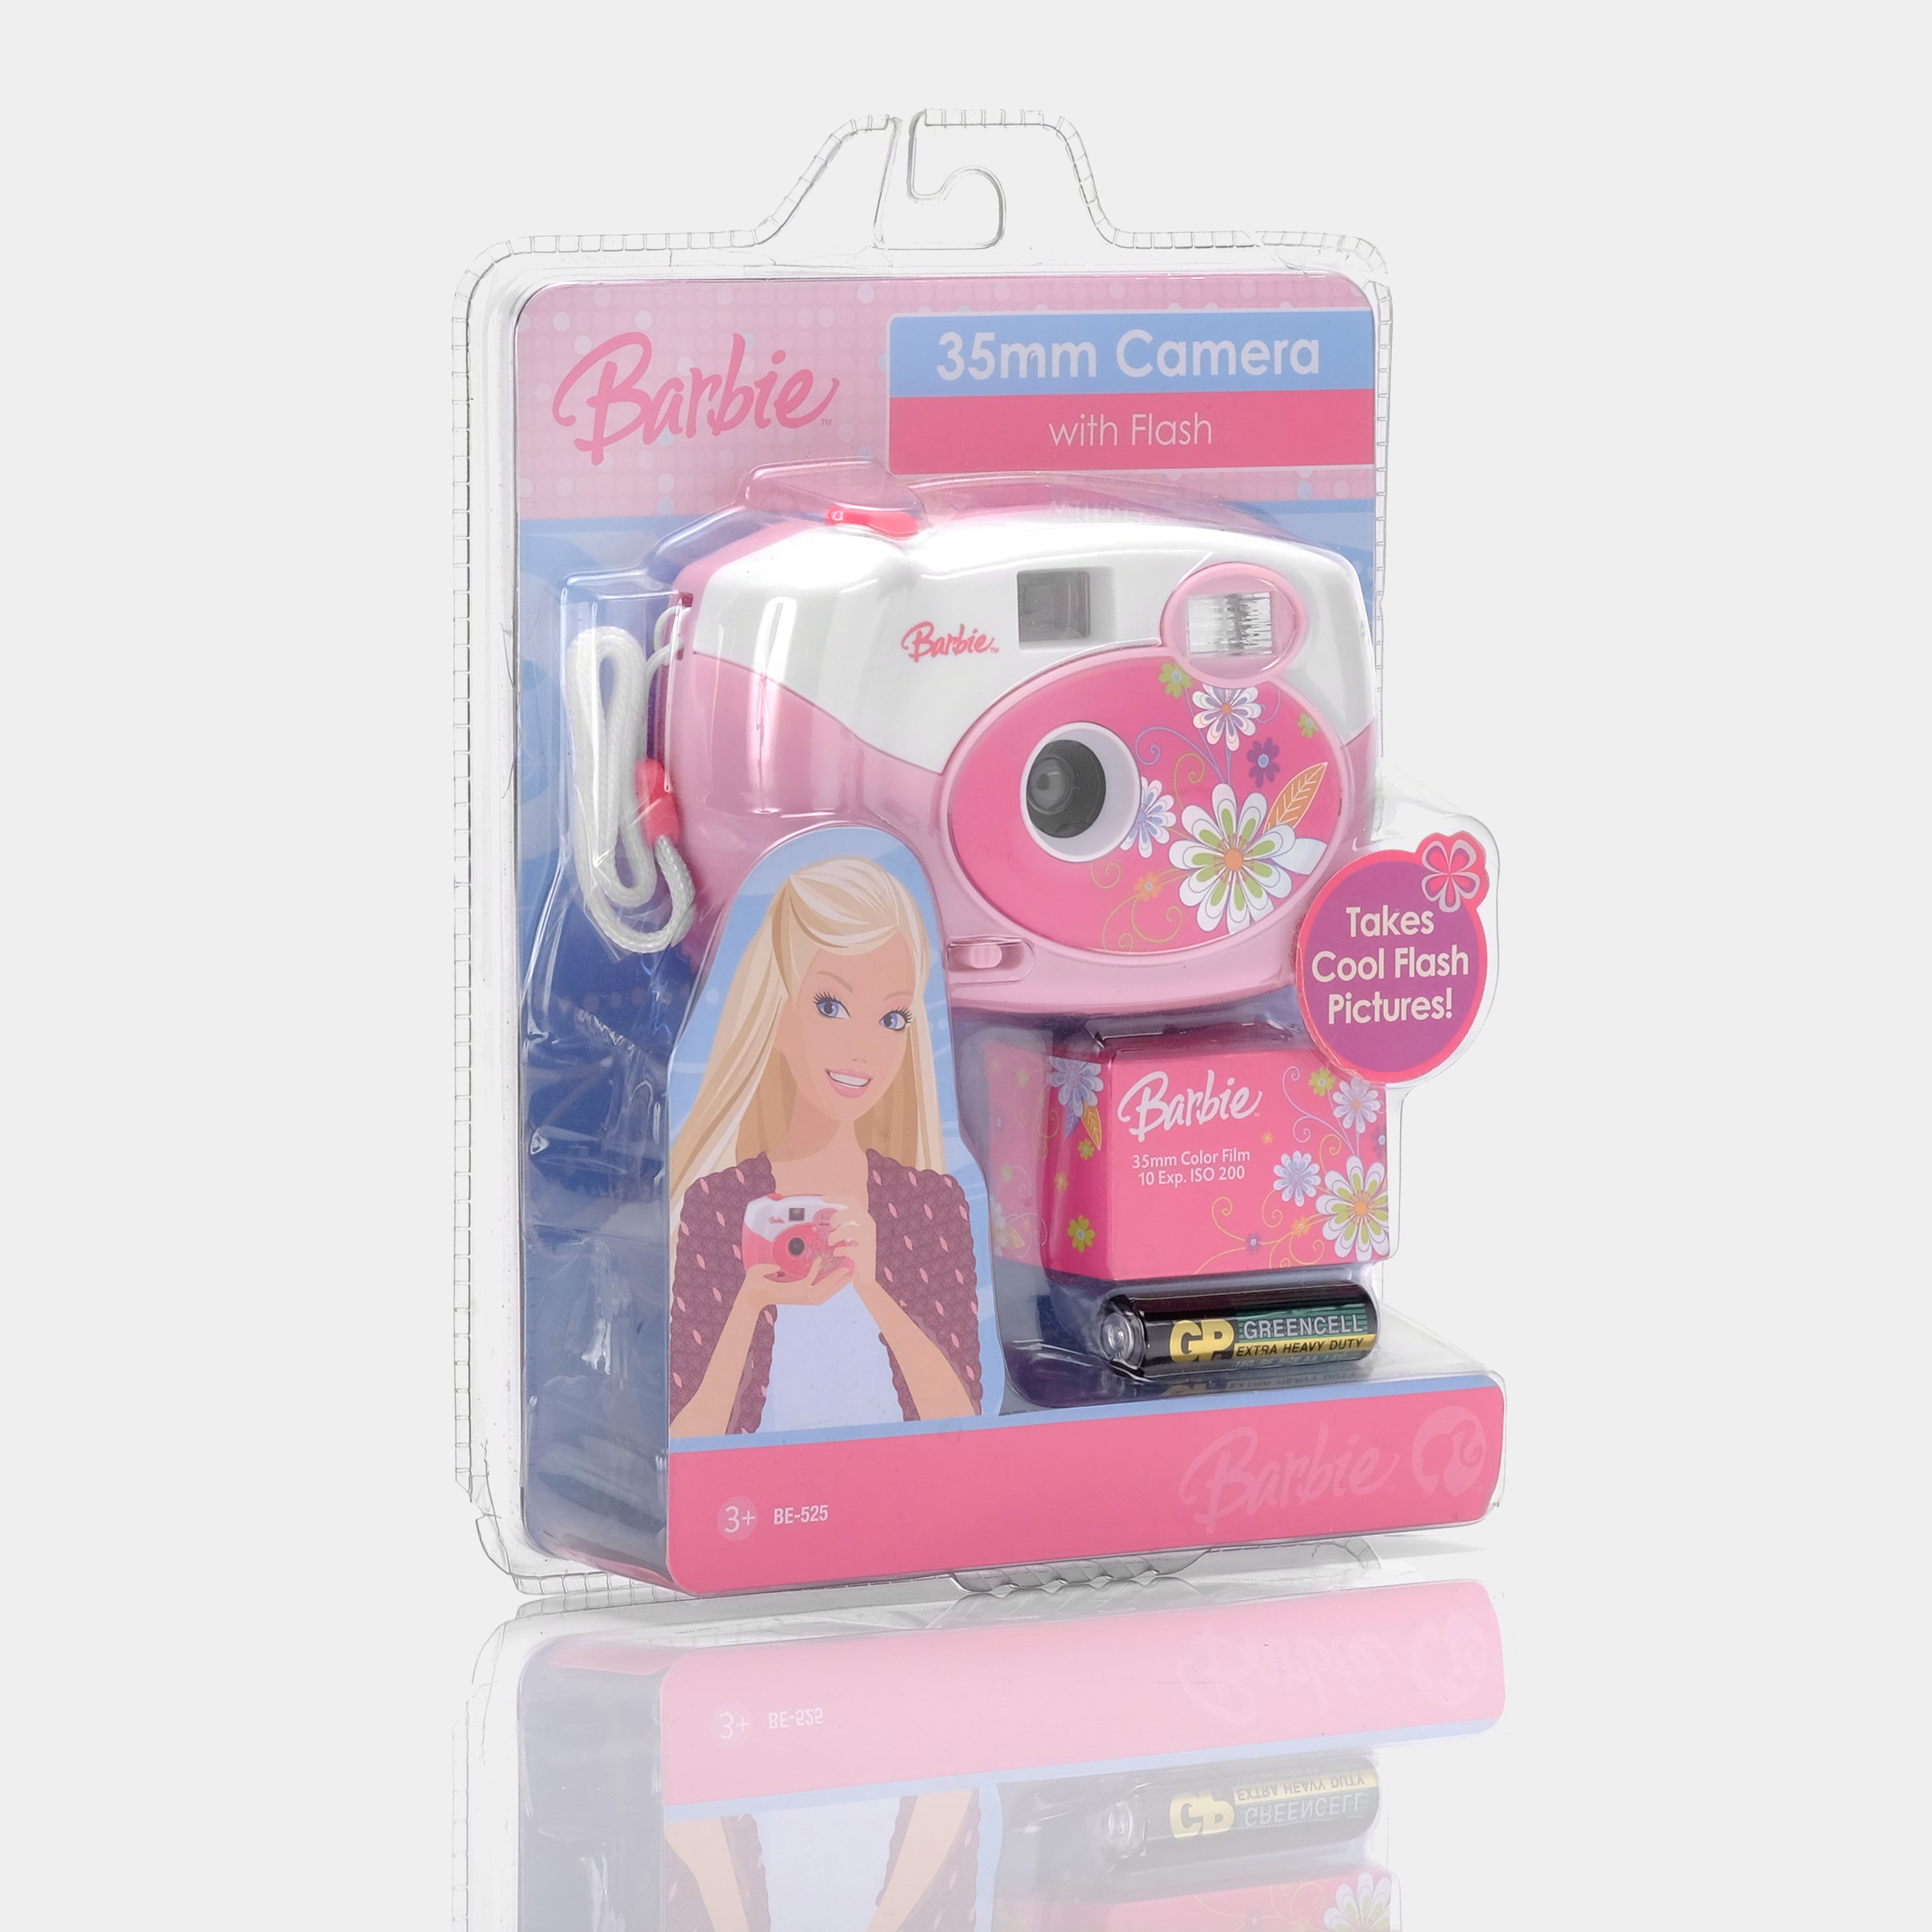 Barbie 35mm Point and Shoot Film Camera With Flash (New In Packaging)